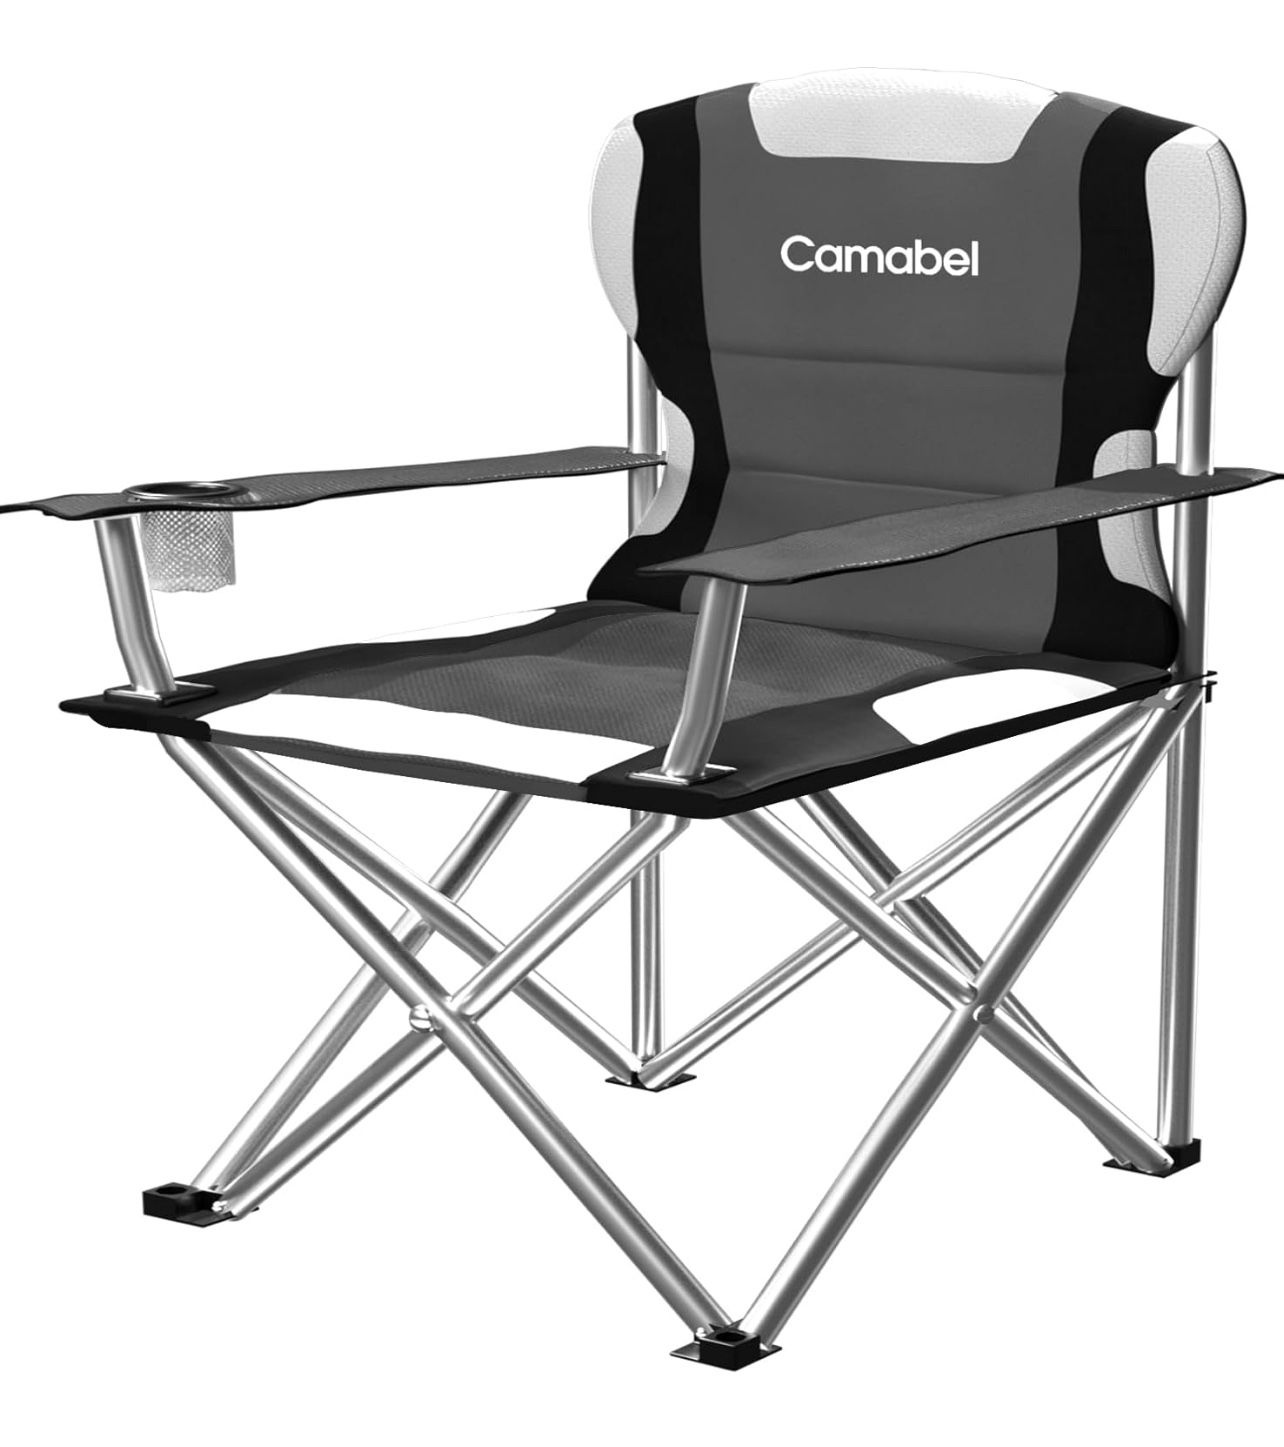 Camabel Oversized Camping Chairs Heavy Duty Folding Lawn Chairs Outside 400 LBS with Cup Holder Carry Bag Beach Chair Foldable Light Weight Lawn Chair